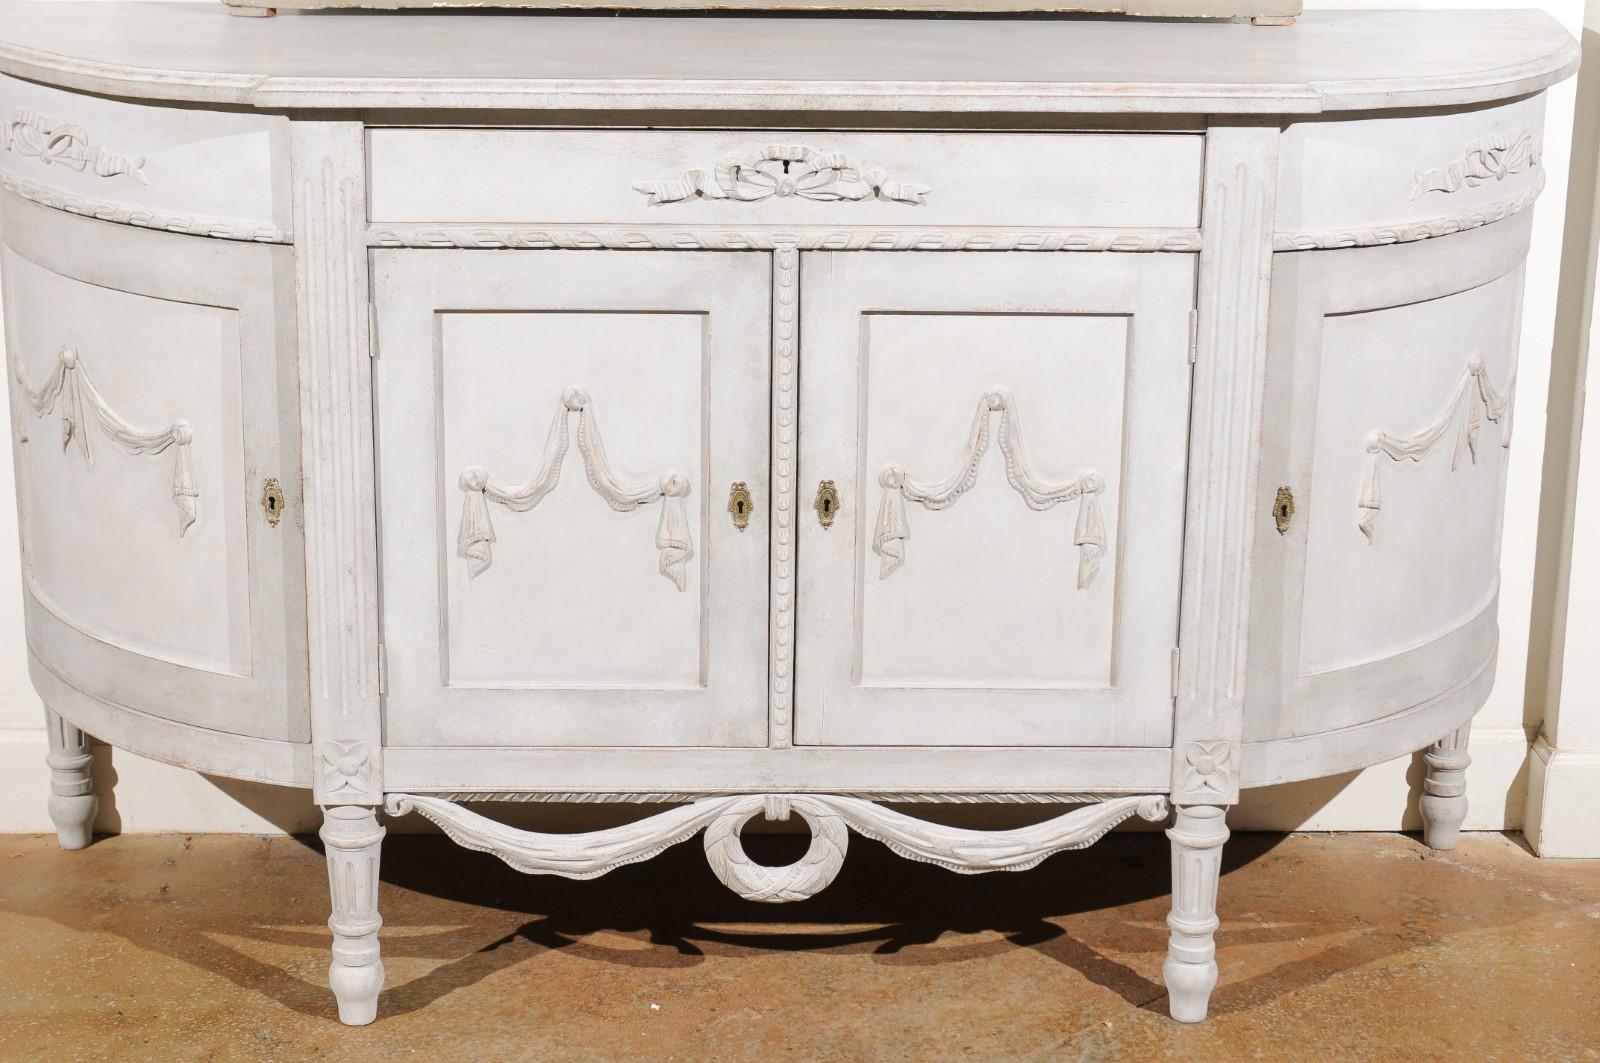 Swedish Gustavian Style Painted Wood Demilune Sideboard with Swags and Ribbons (Schwedisch)